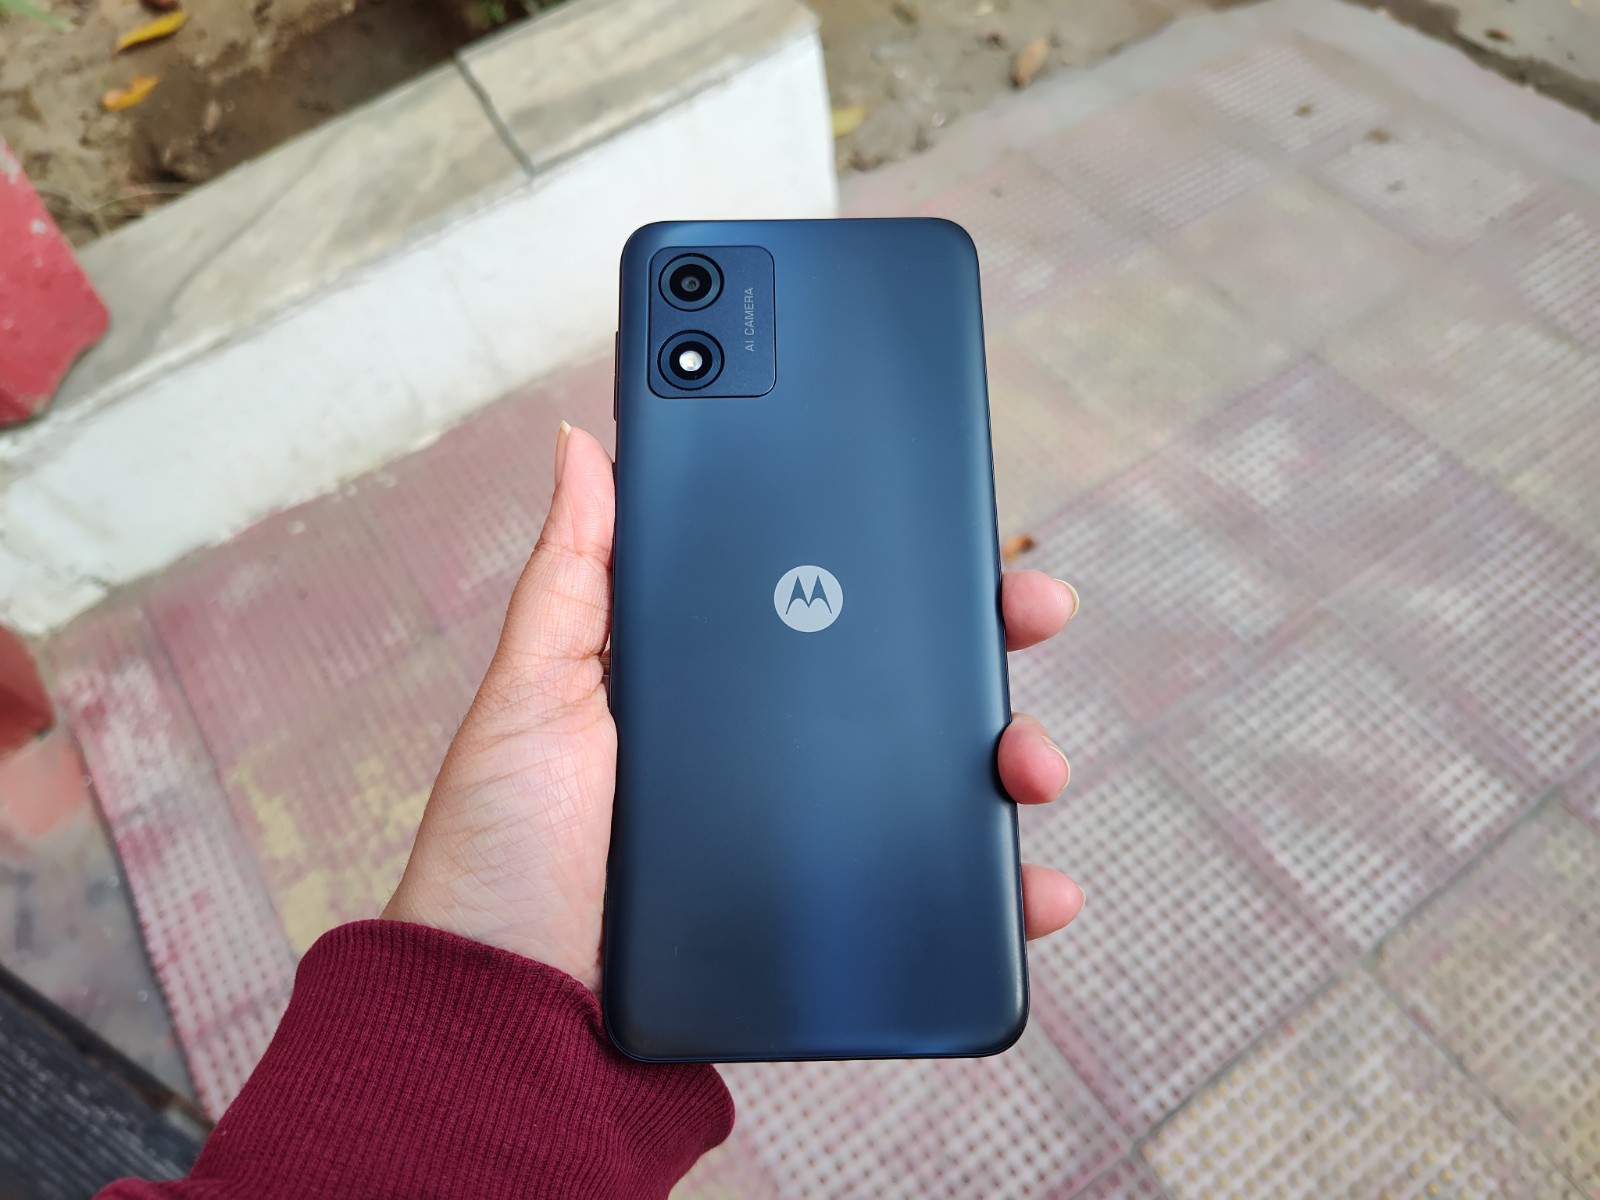 Motorola Moto E13 Review: Is it really the most affordable phone with top-quality  specs? - Smartprix